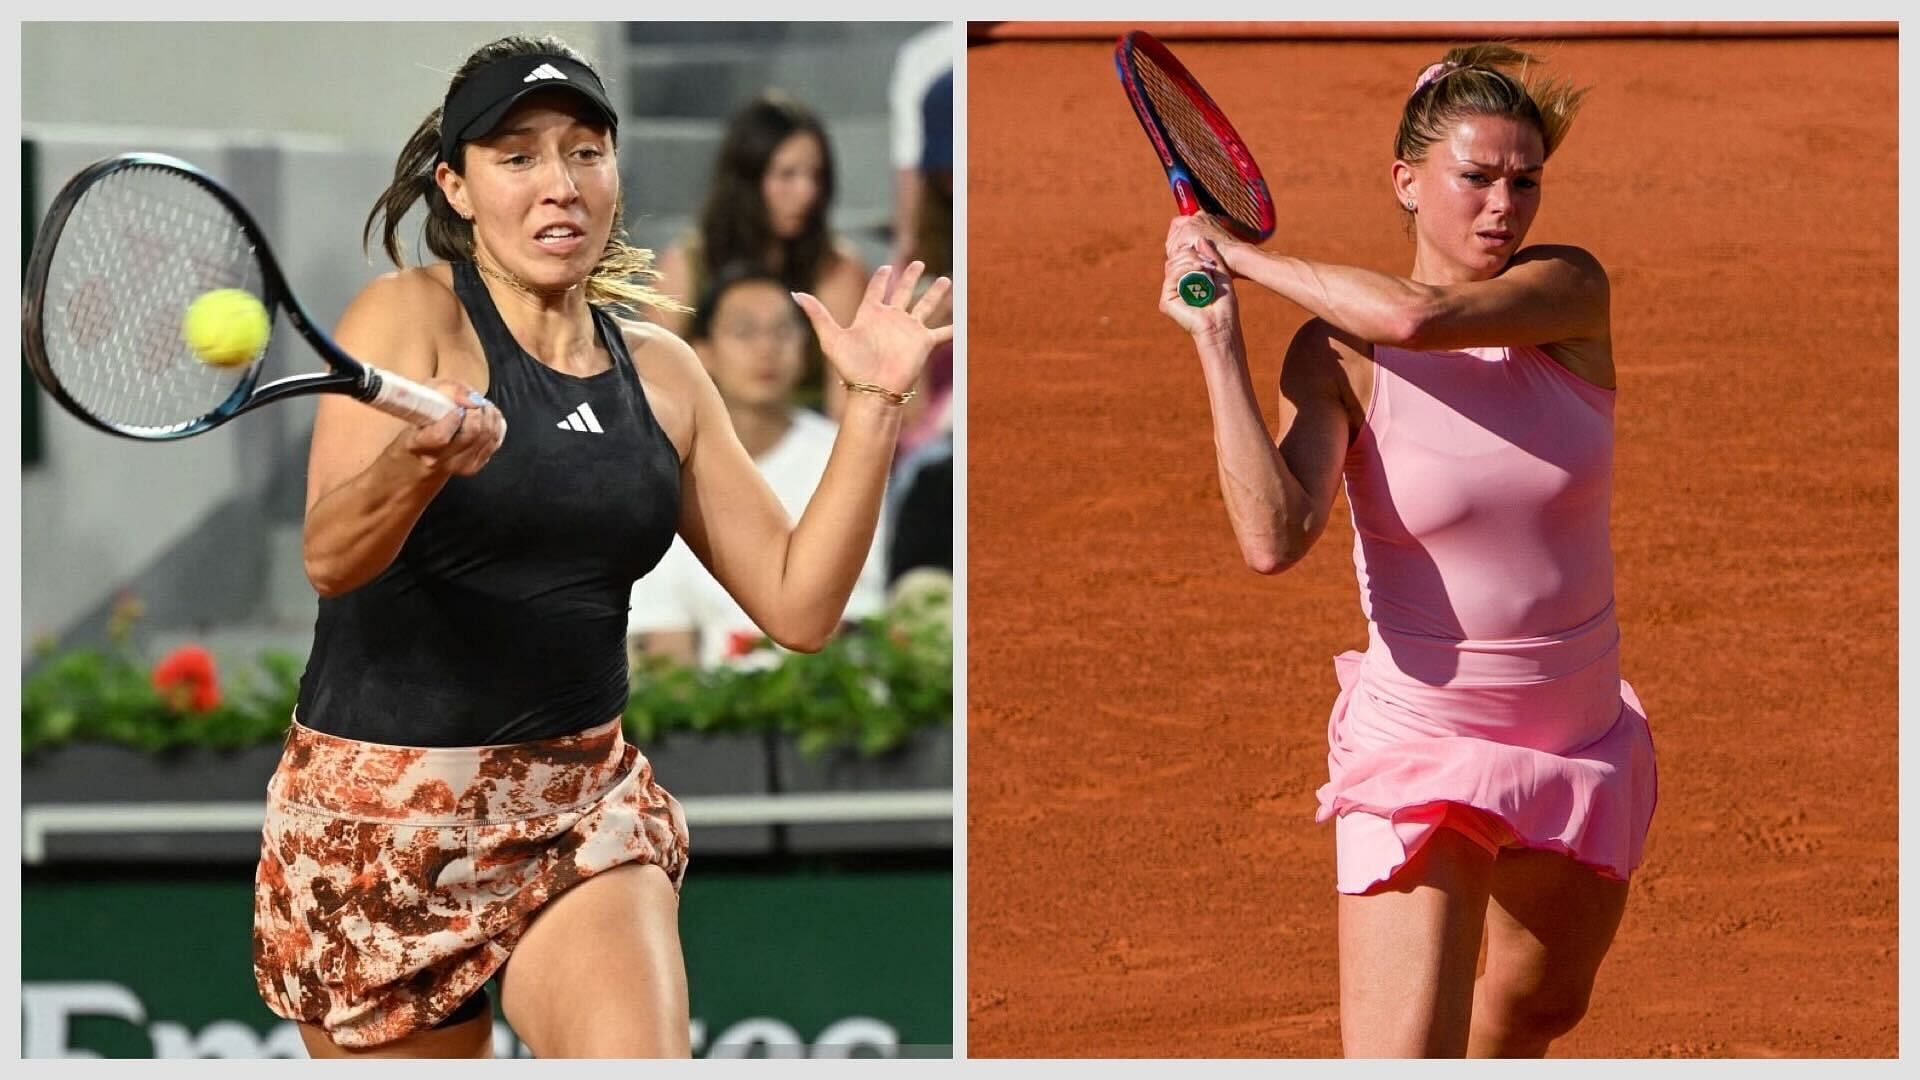 Jessica Pegula vs Camila Giorgi is one of the second-round matches at the French Open.